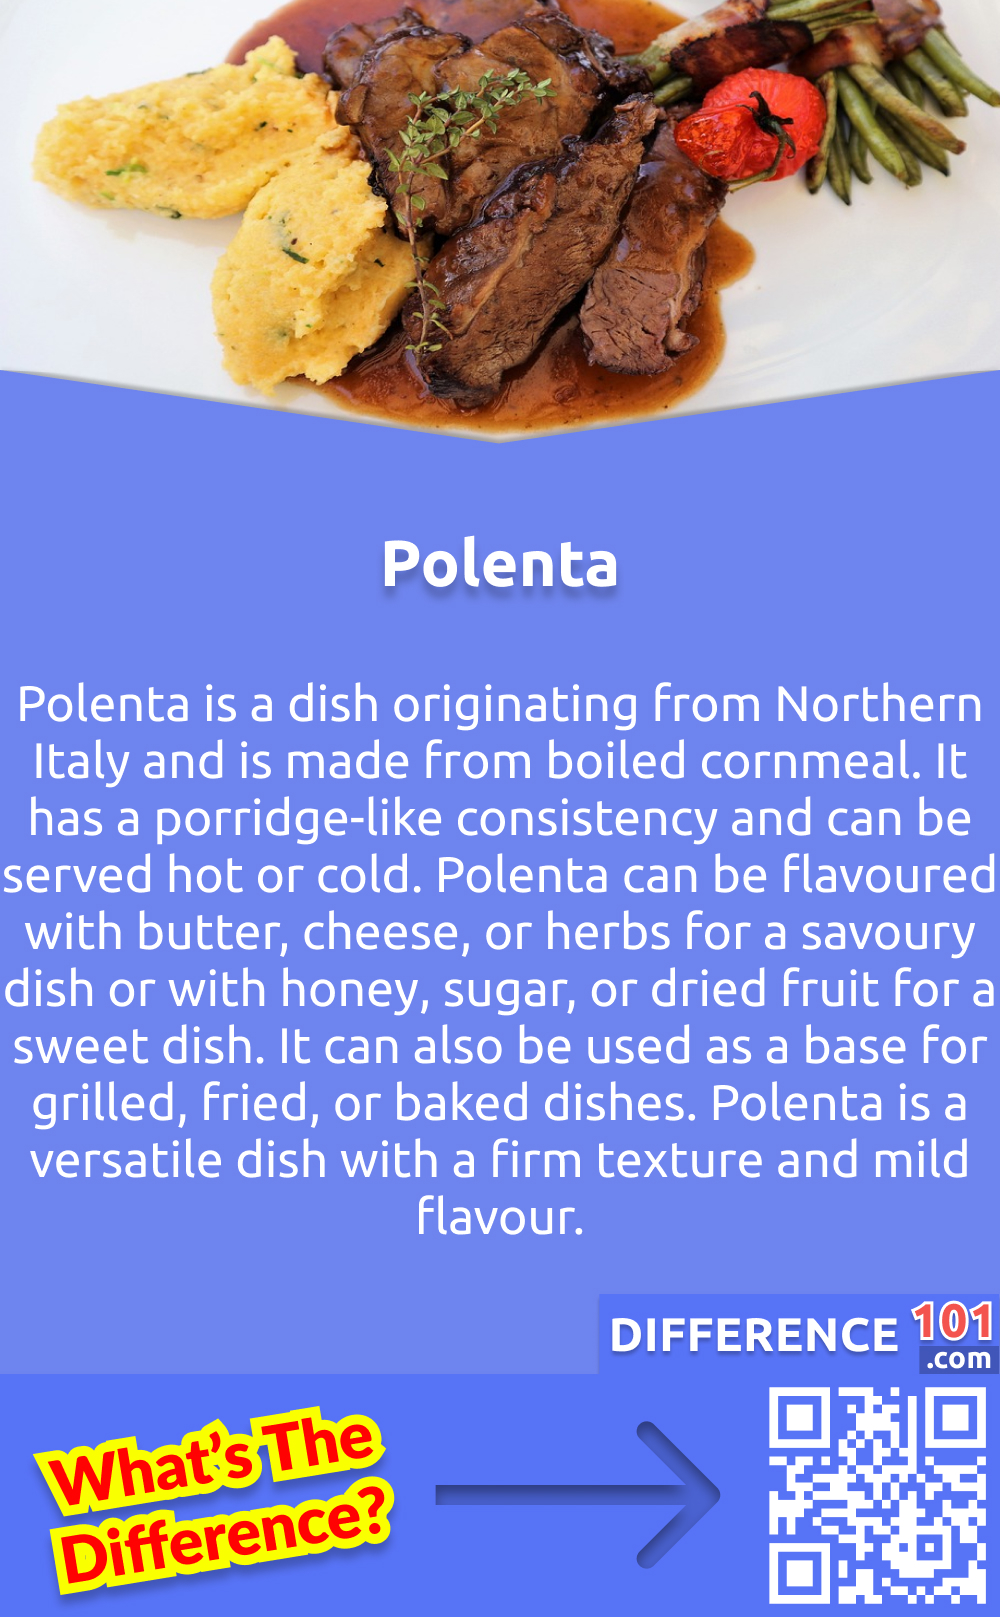 What Is Polenta? Polenta is a dish originating from Northern Italy and is made from boiled cornmeal. It has a porridge-like consistency and can be served hot or cold. Polenta can be flavoured with butter, cheese, or herbs for a savoury dish or with honey, sugar, or dried fruit for a sweet dish. It can also be used as a base for grilled, fried, or baked dishes. Polenta is a versatile dish with a firm texture and mild flavour. It is a great accompaniment to many sauces, vegetables, and proteins and can be used as a healthier alternative to pasta or rice. It is a nutritious dish that is high in iron, fibre, and magnesium. Polenta is easy to prepare and can be a great addition to any meal.
